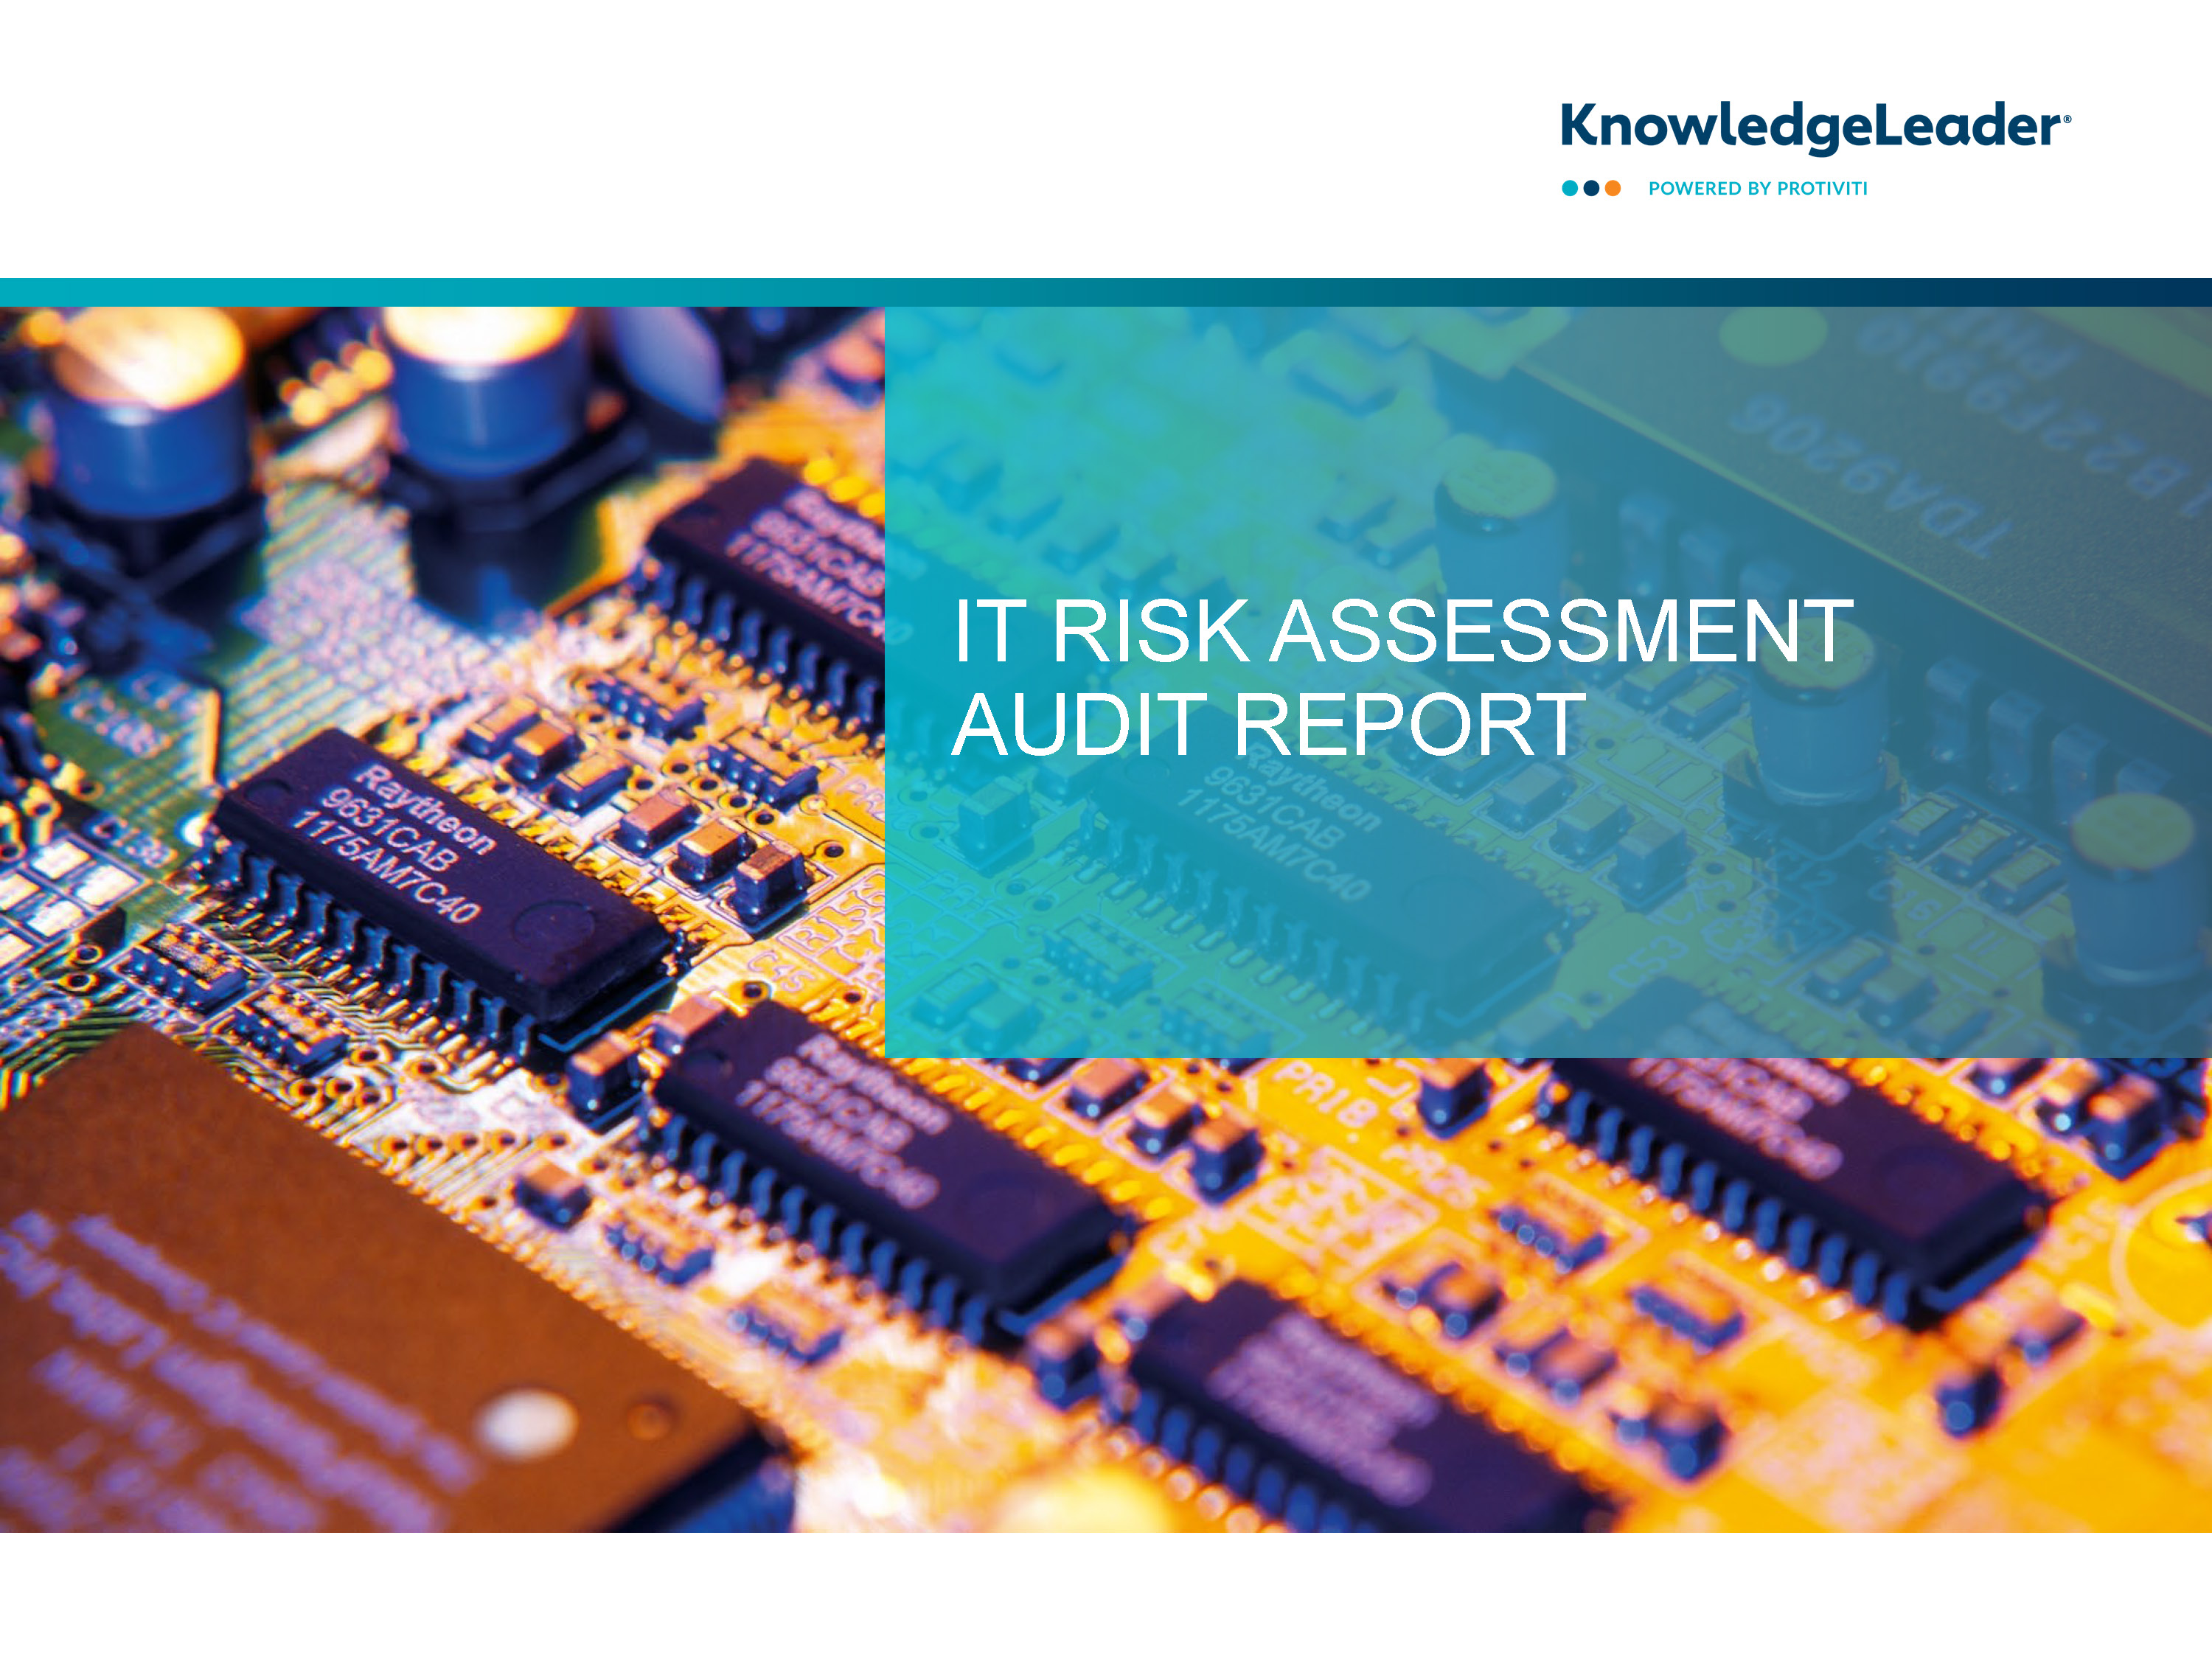 Screenshot of the first page of IT Risk Assessment Audit Report